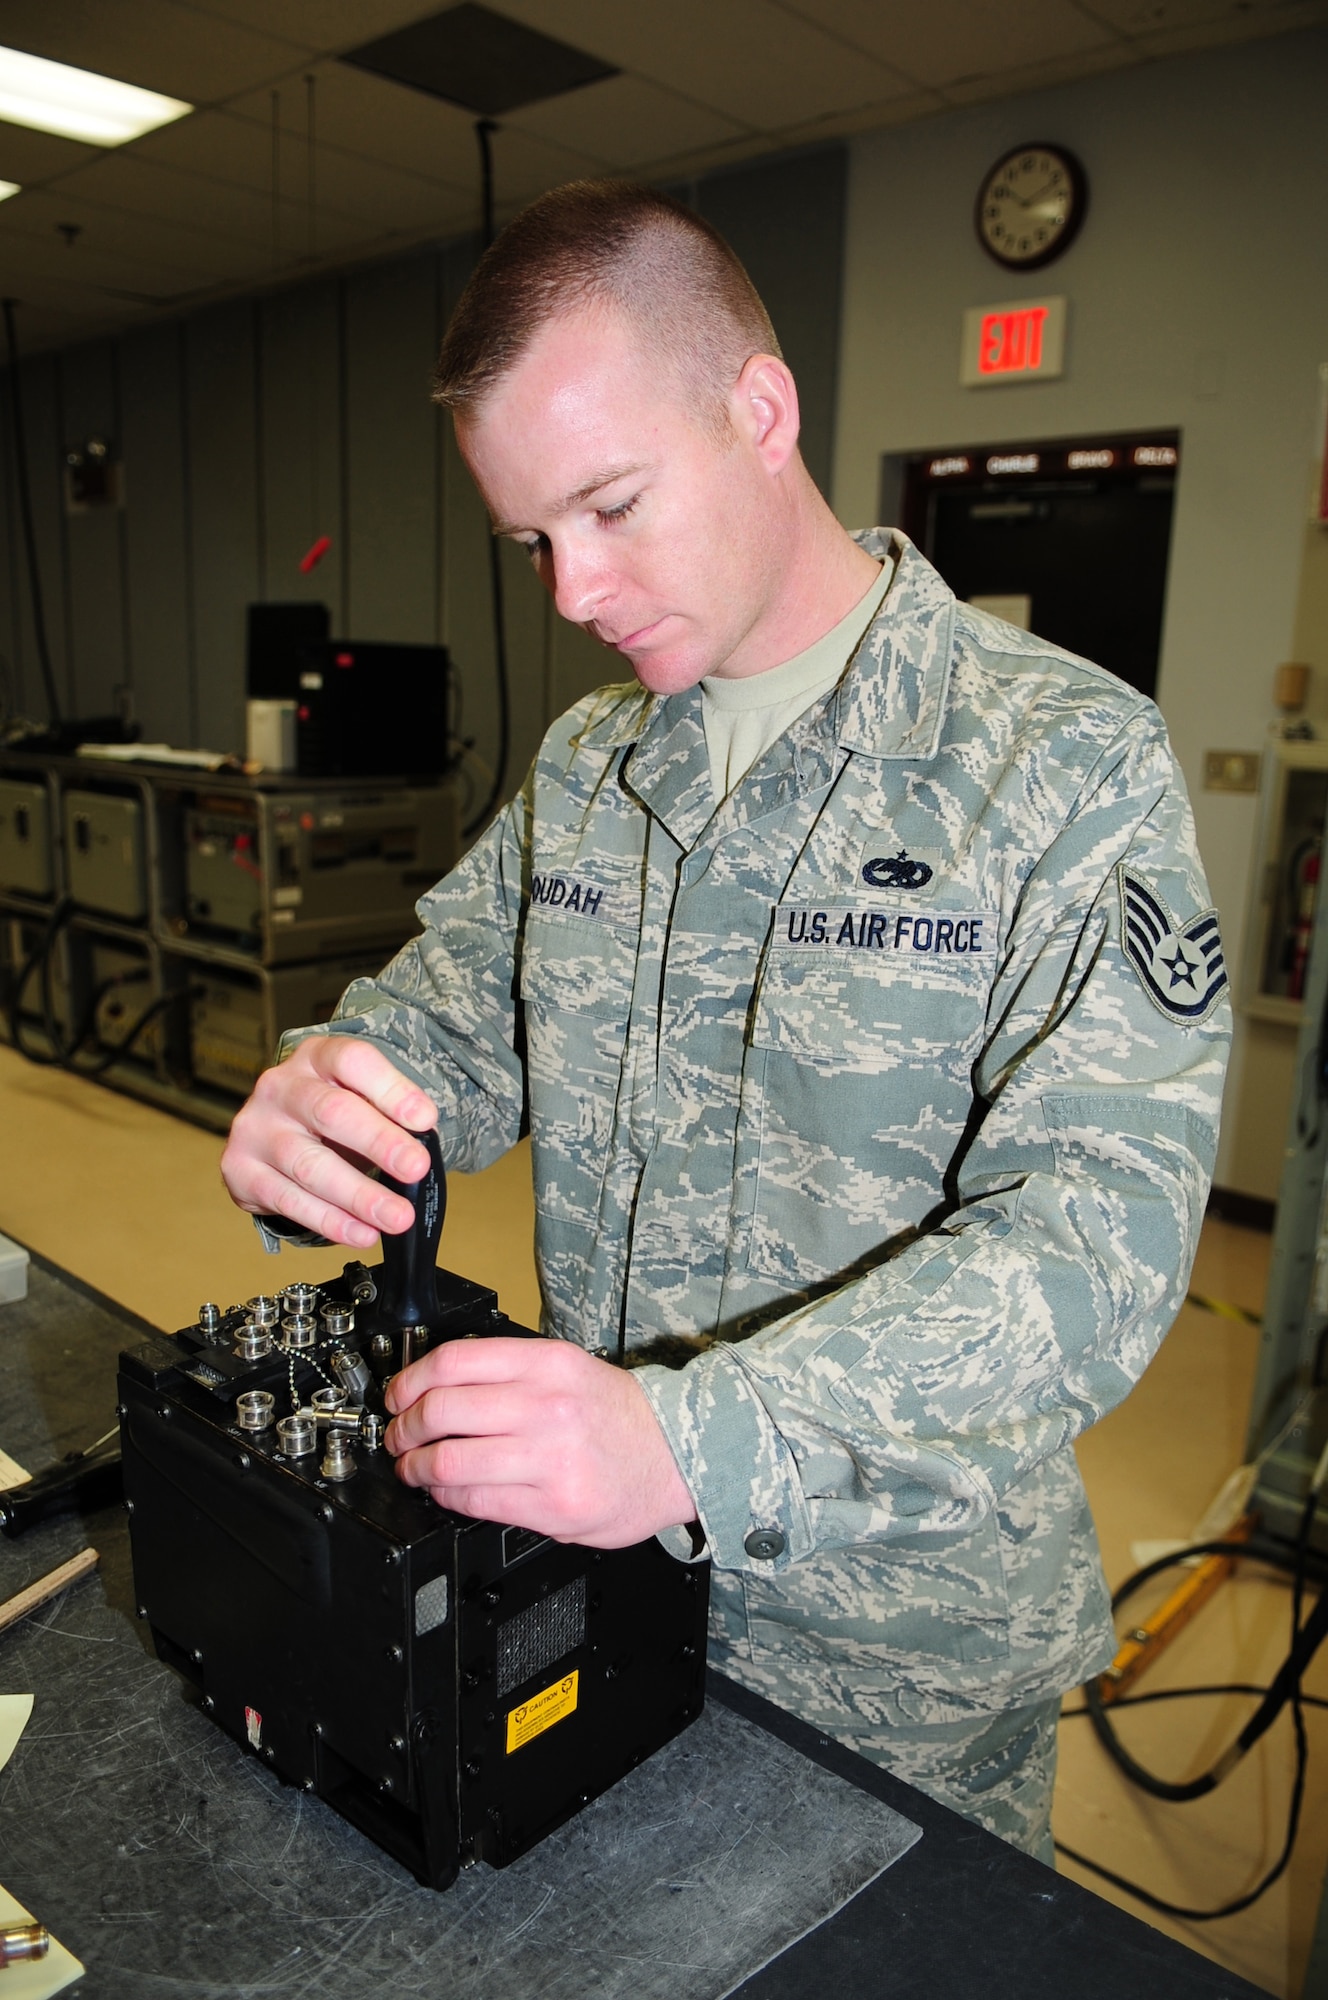 Staff Sgt. Jason Boudah, 4th Component Maintenance Squadron, tightens a screw on a wiring hub for an F-15E Strike Eagle at Seymour Johnson Air Force Base, N.C., March 10, 2009. 4th CMS is made up of different back shops that fix many of the parts for the F-15E's stationed here. (U.S. Air Force photo by Airman 1st Class Rae Perry)